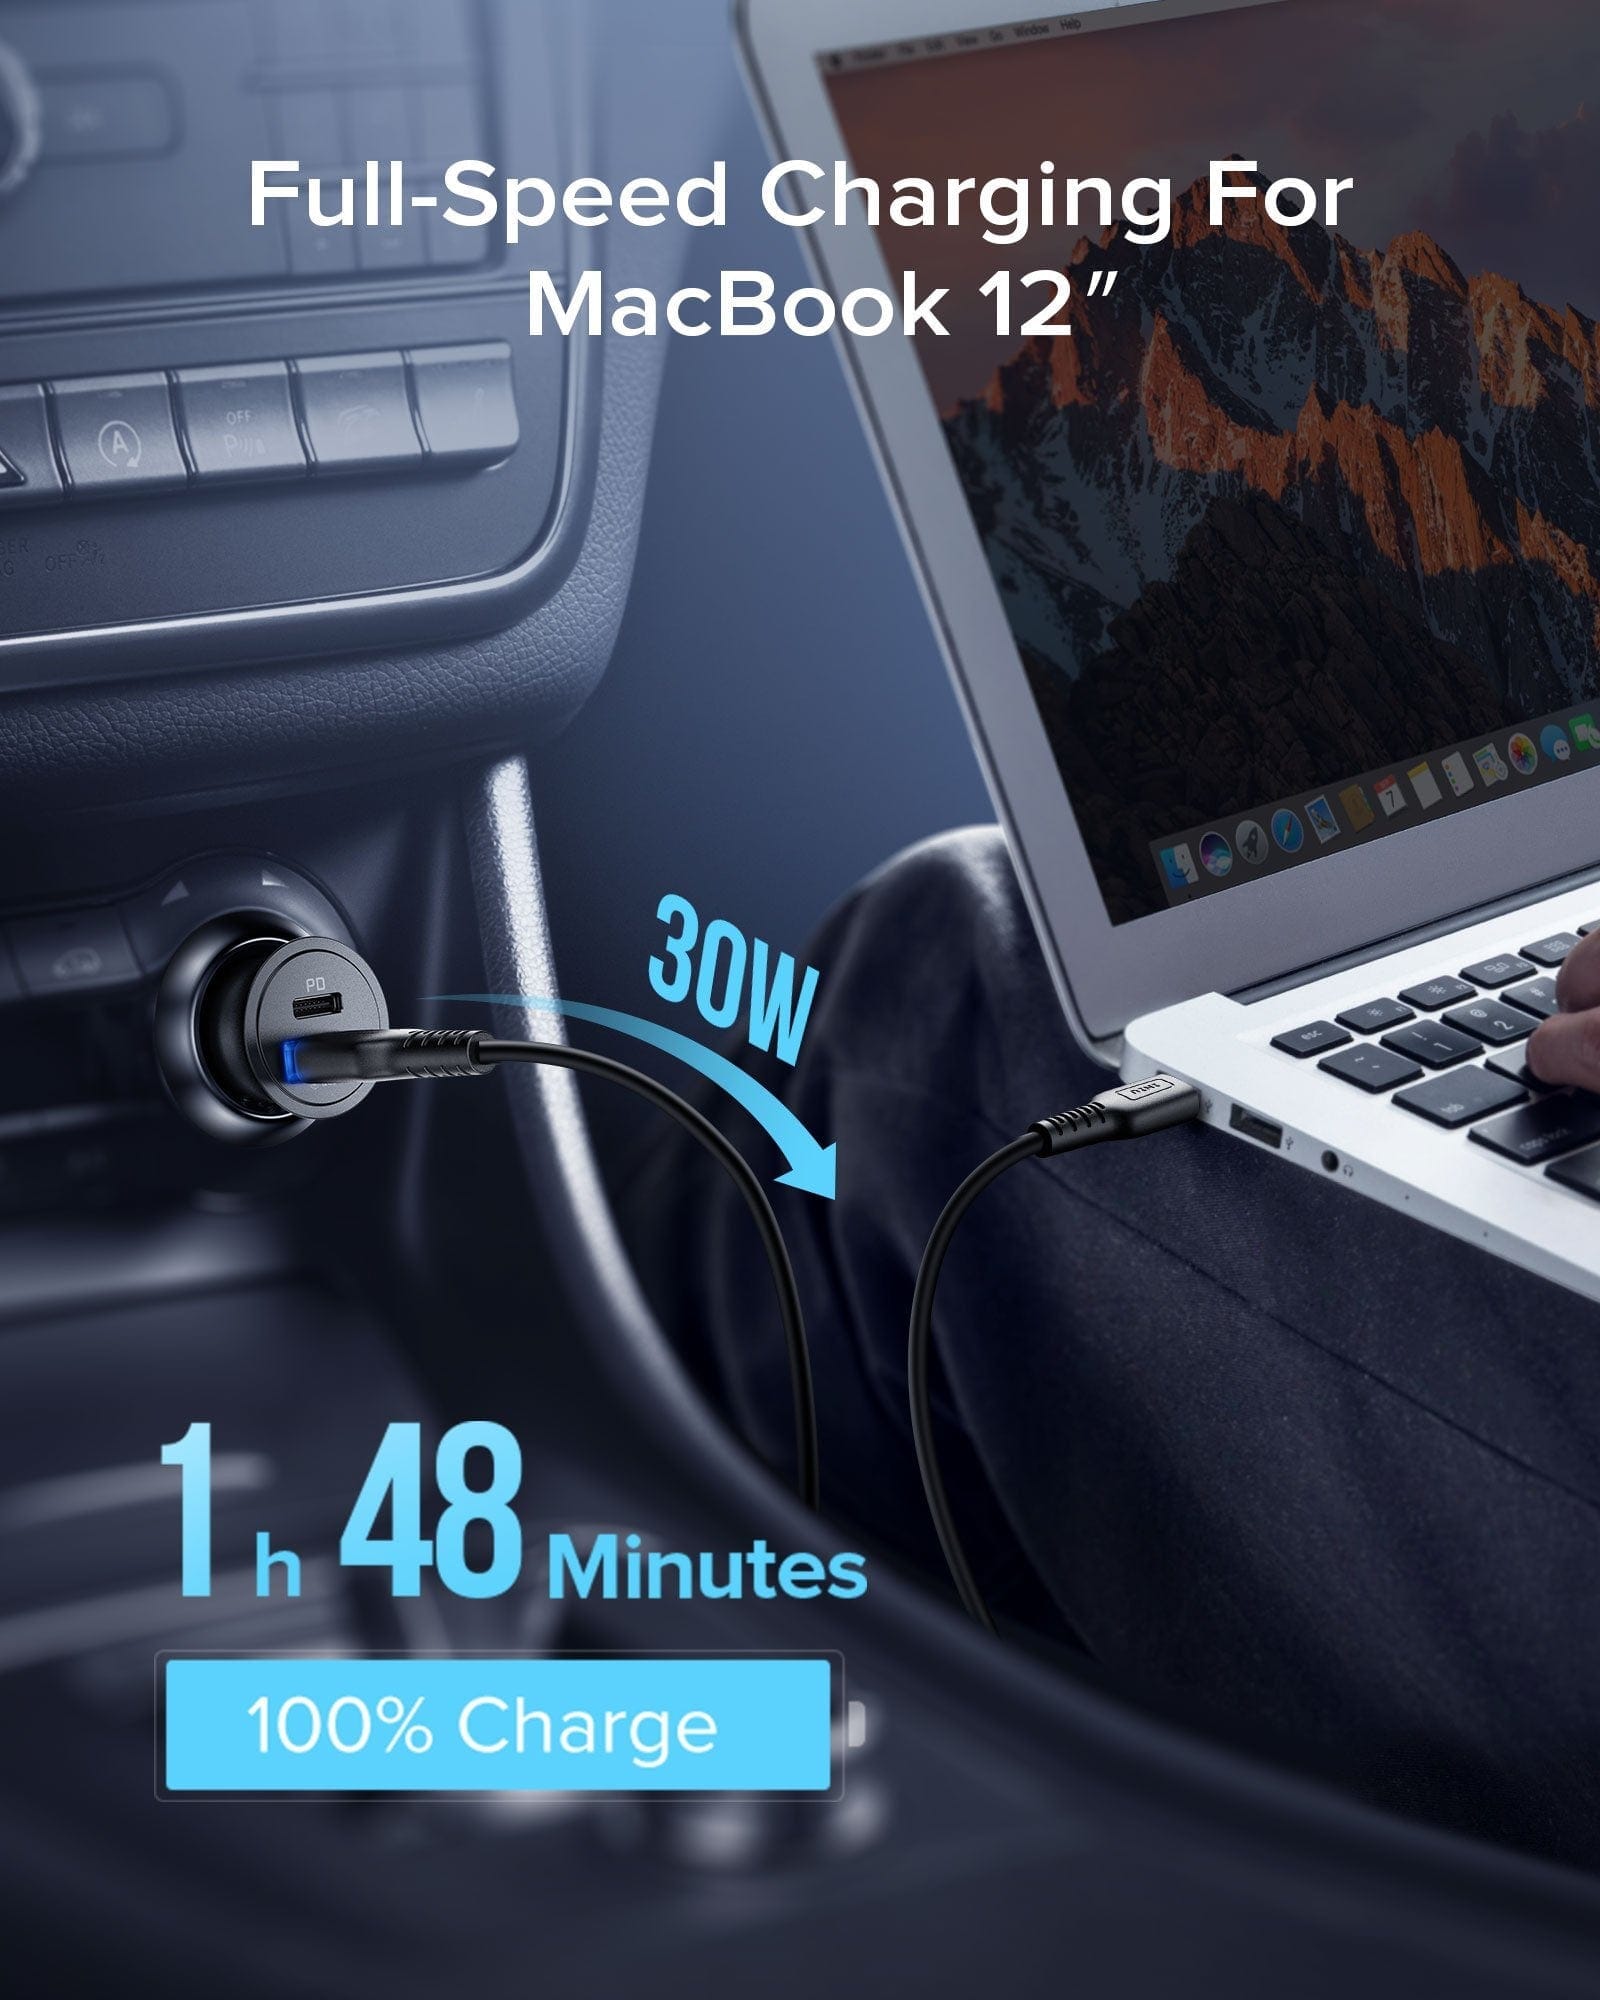 30W Full-Speed Charging For MacBook 12" 100% in 1 h 48 mins 